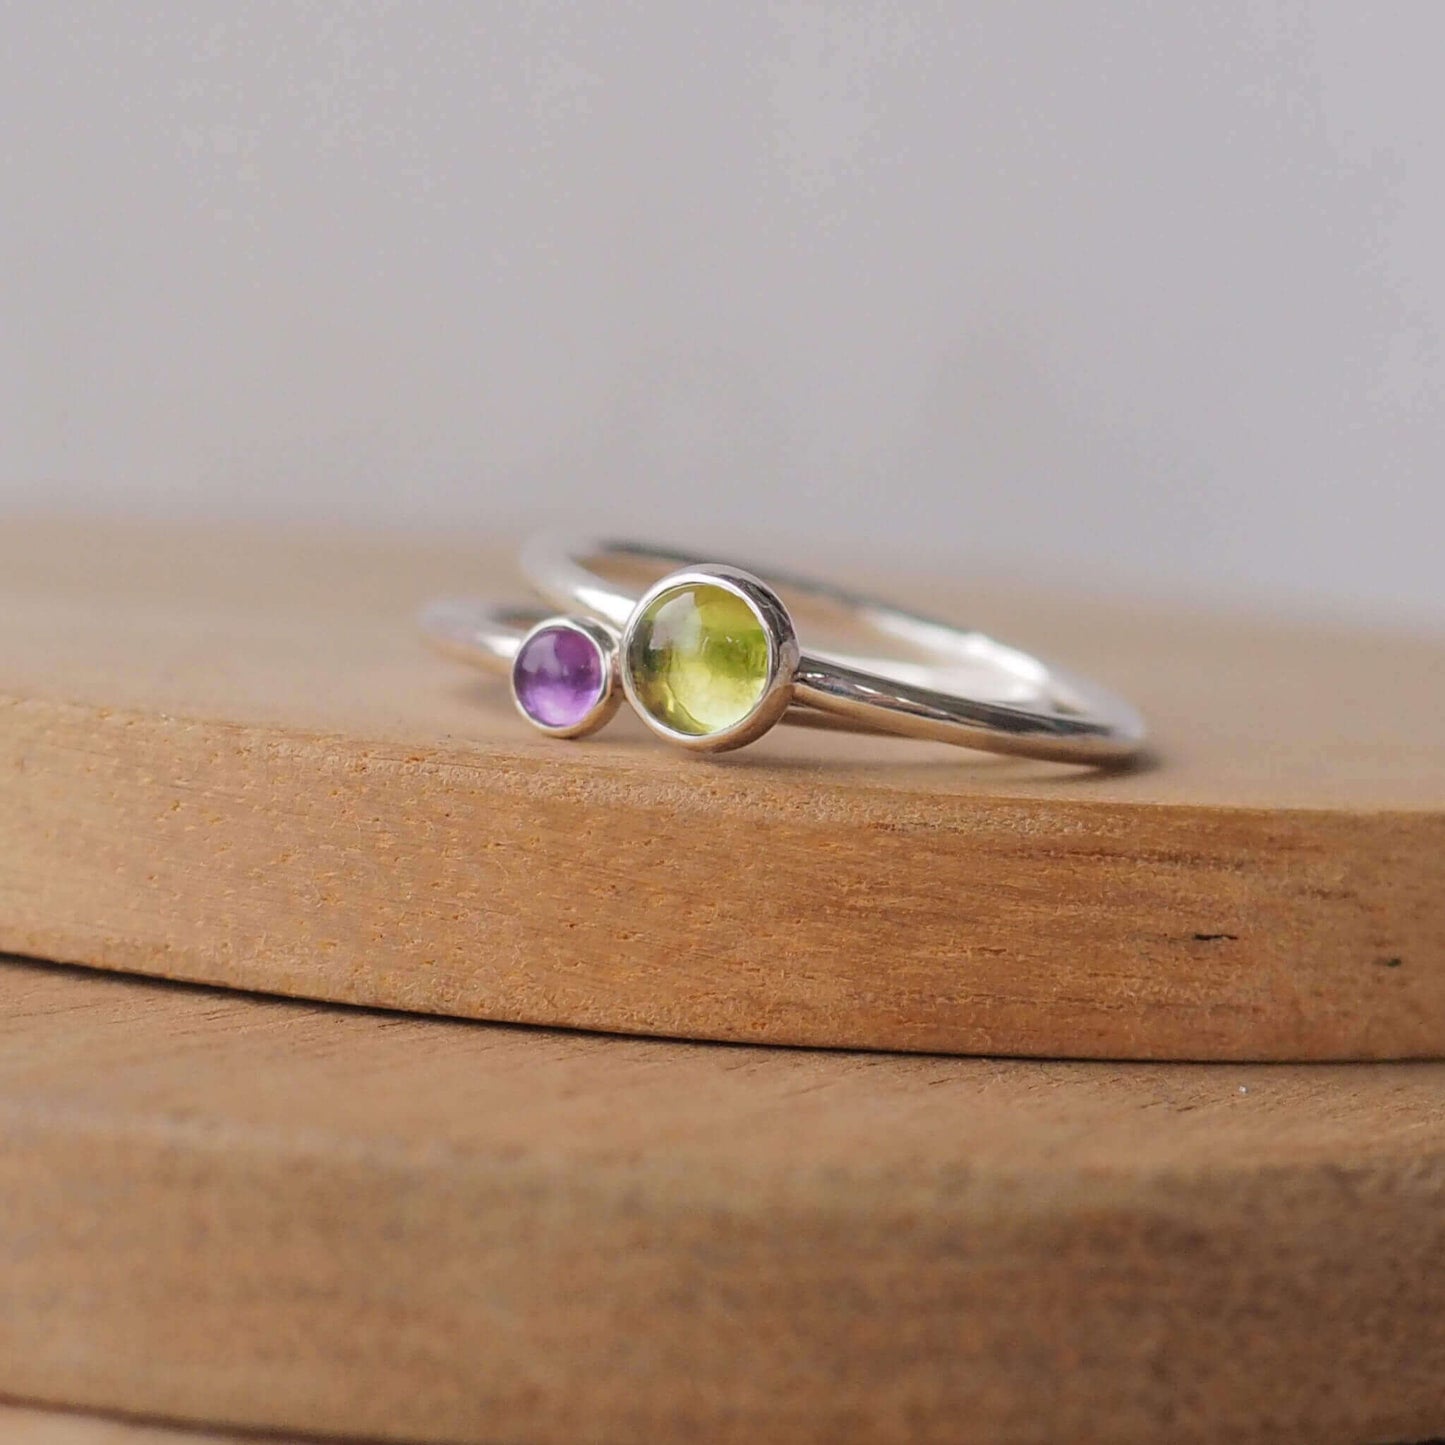 Two silver ring set with round stones. Simple round bands with a 5mm green Peridot and a 3mm purple Amethyst, birthstones for August and February. Rings are pictured on wood background. Handmade by Maram Jewellery in Scotland